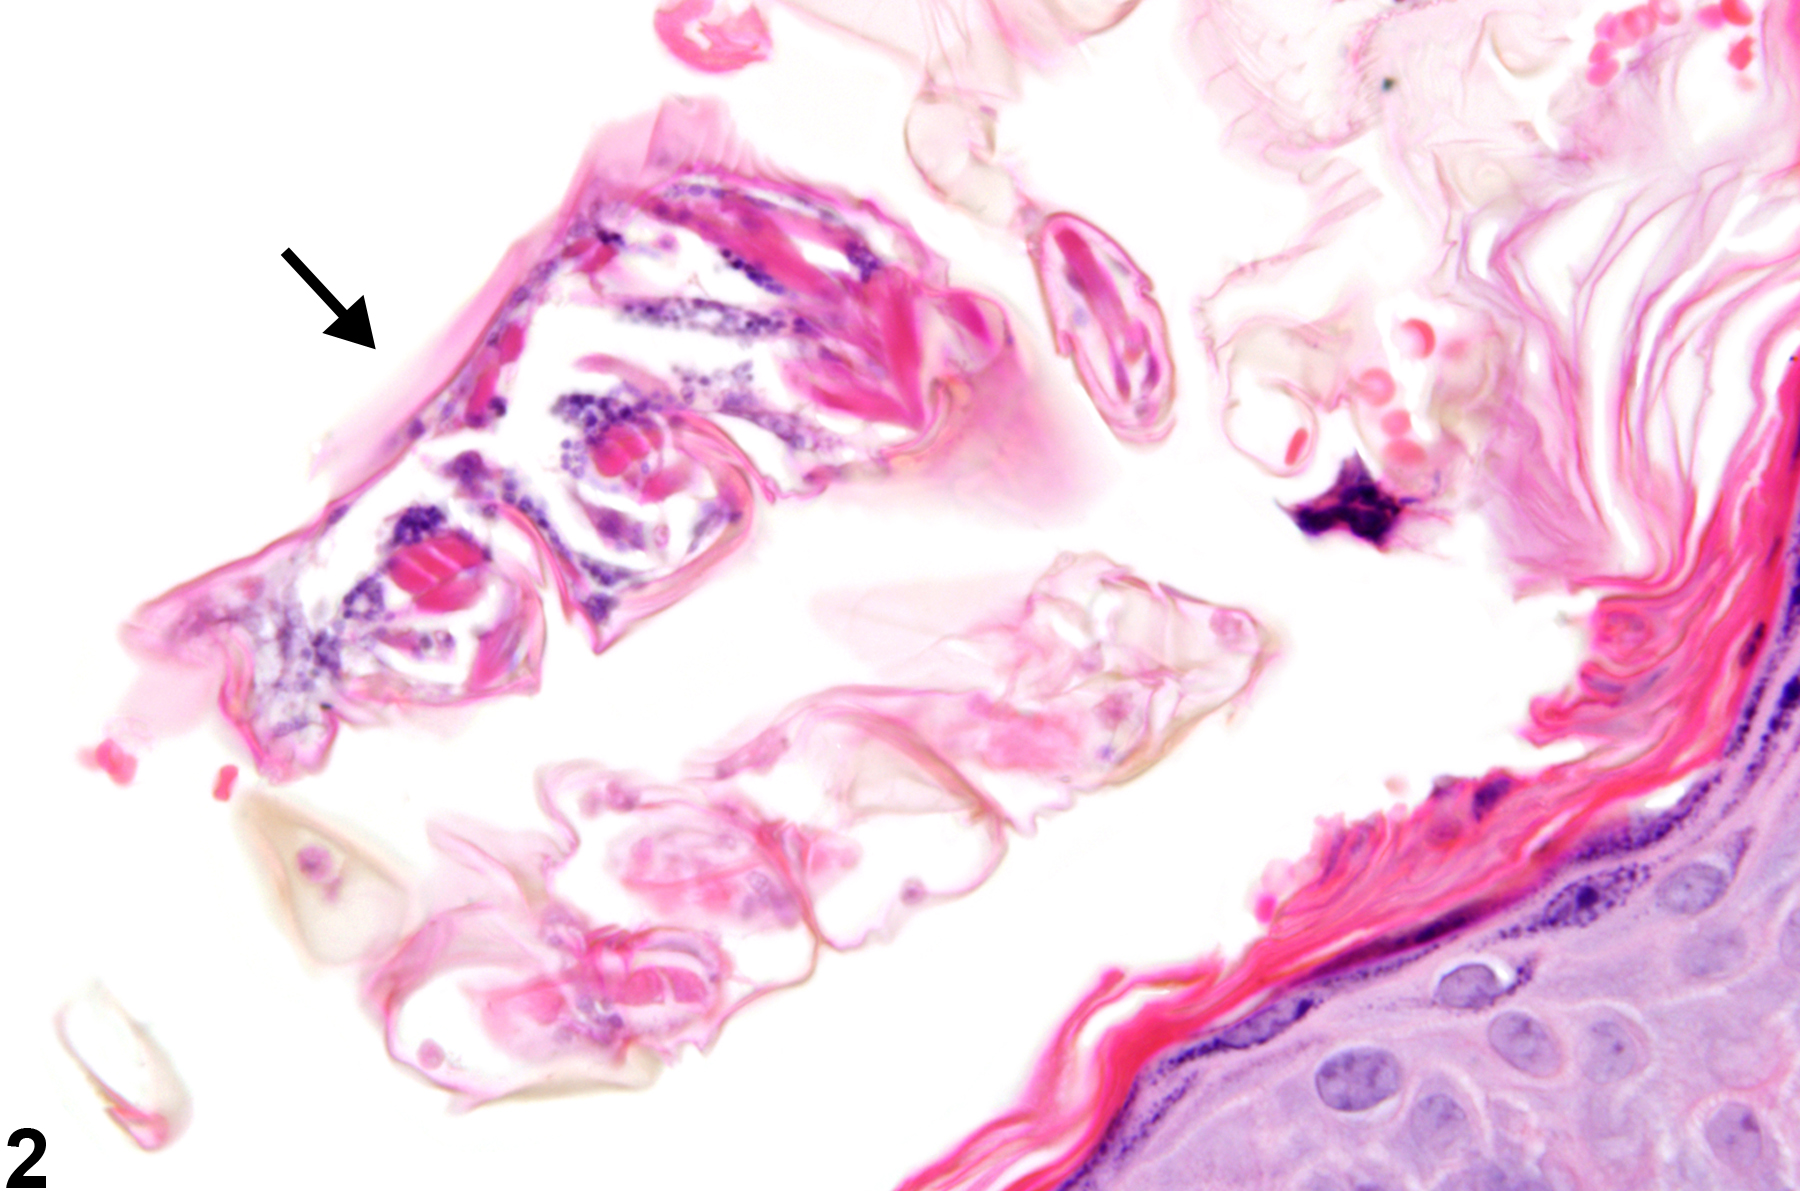 Image of ectoparasites in the skin from a female B6C3F1 mouse in a chronic study